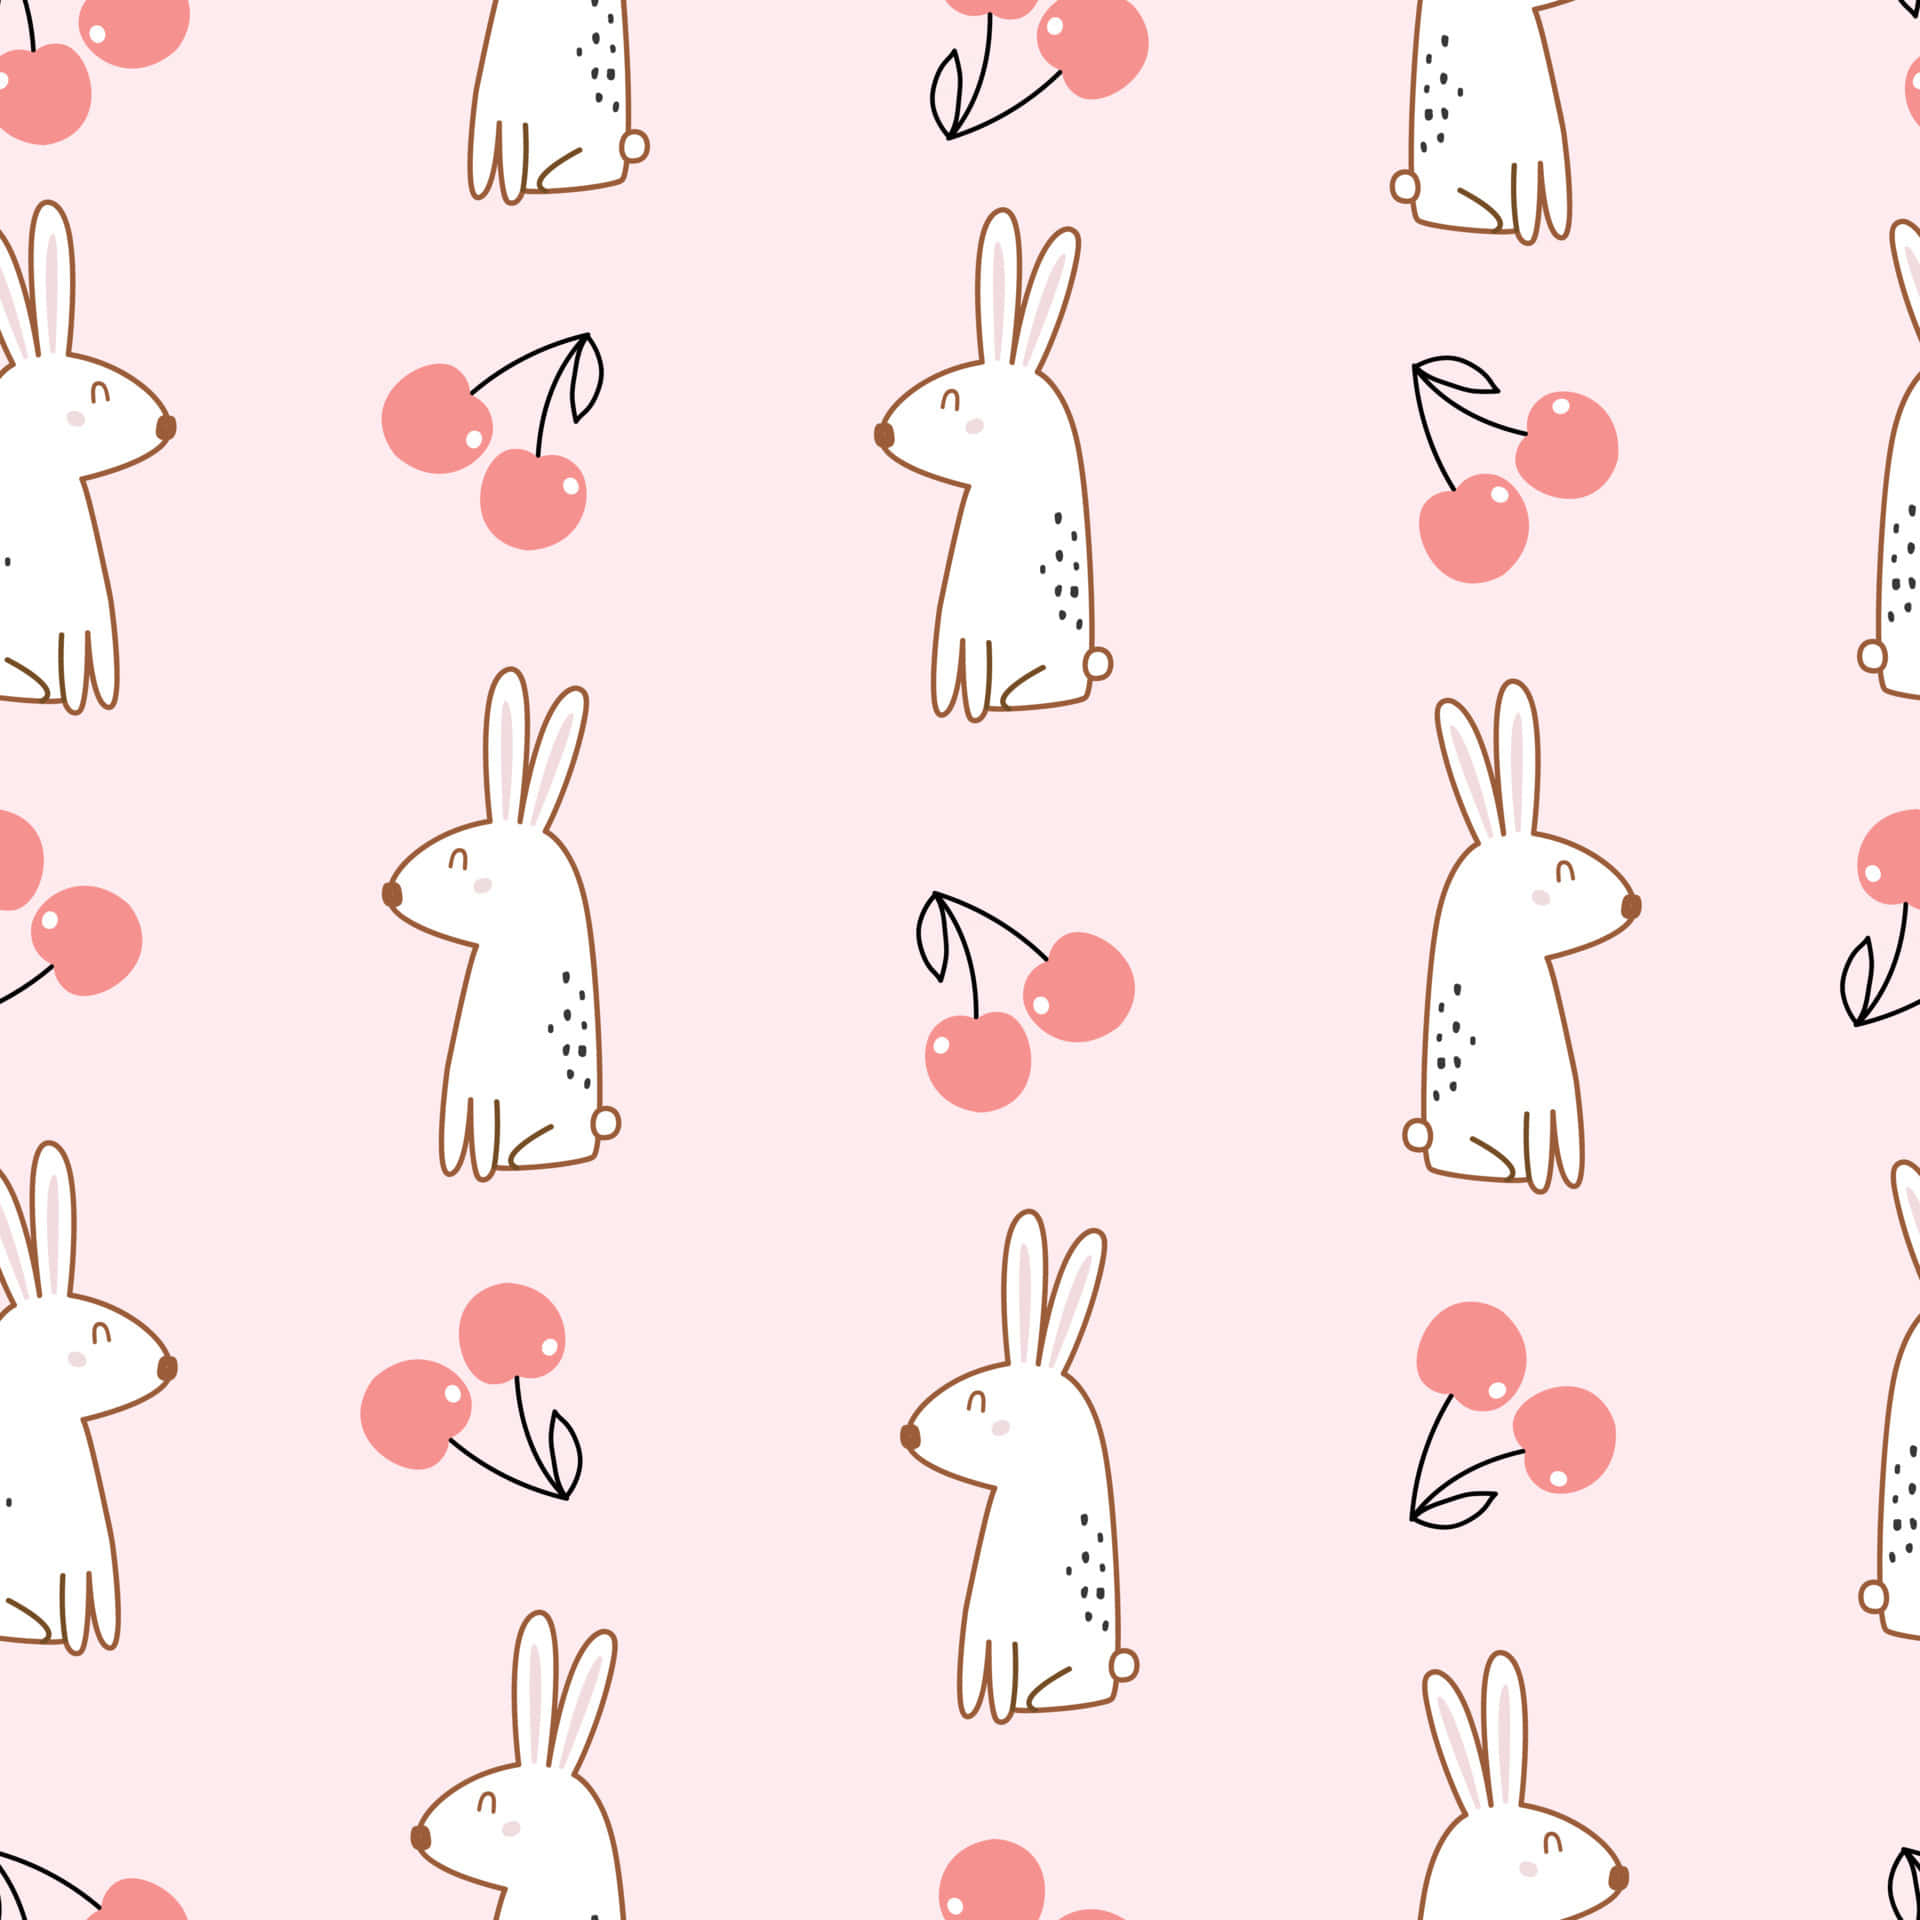 Delightful Rabbit Surrounded by Adorable Pink Cherries Wallpaper